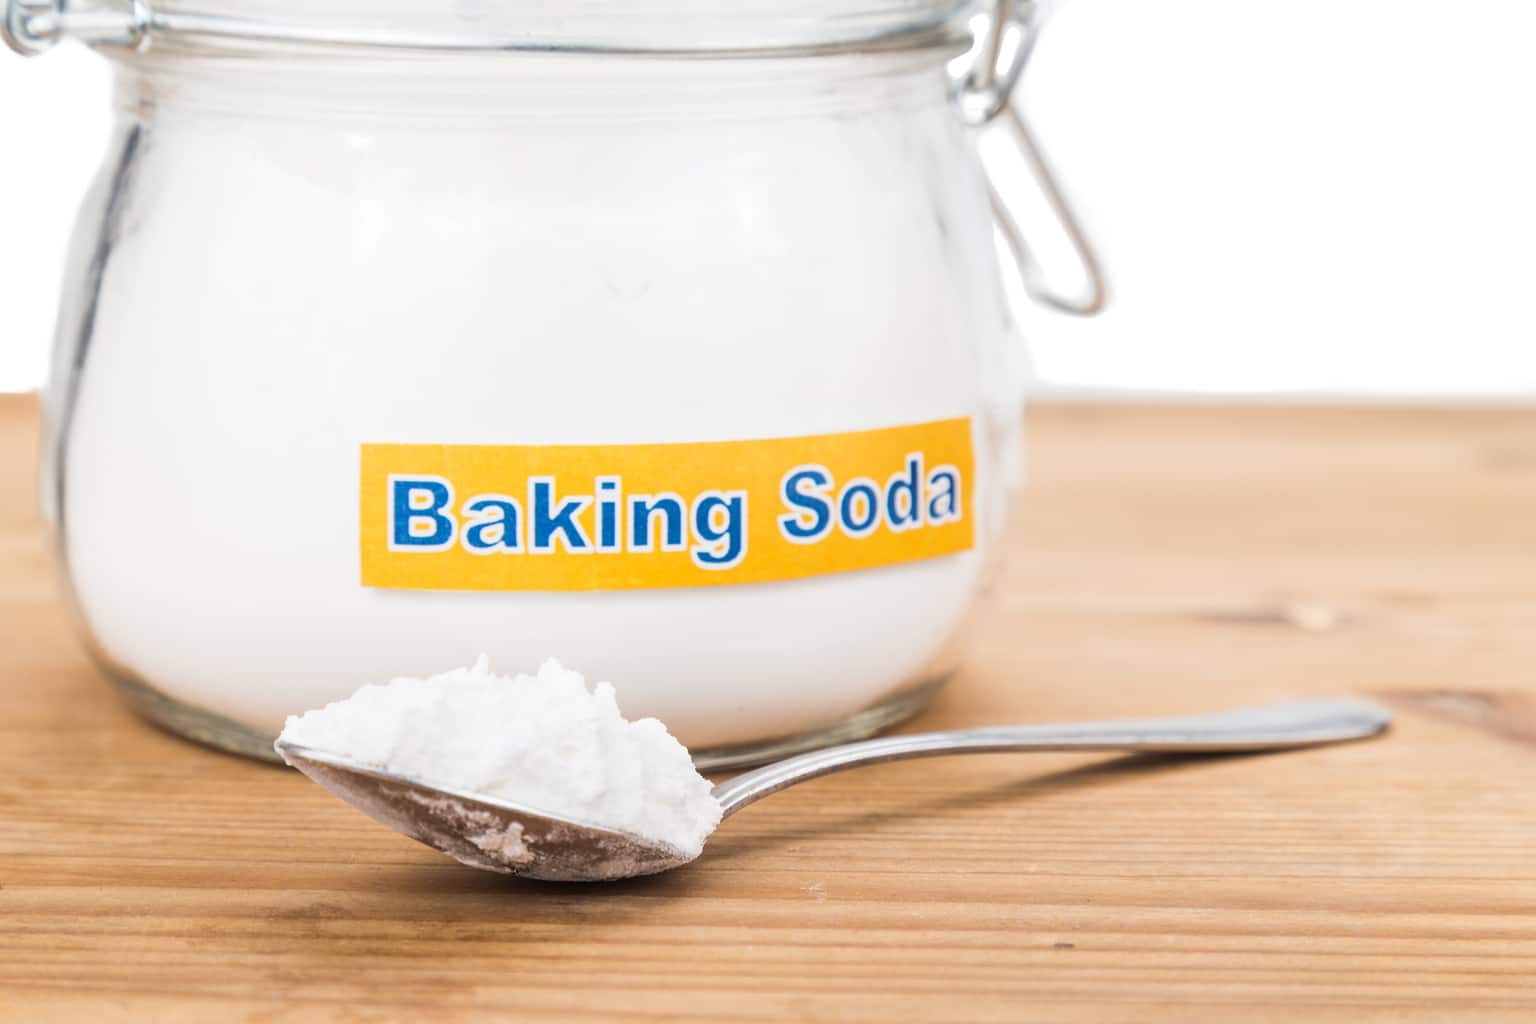 Baking soda: does it help cancer? Does it make you run faster?